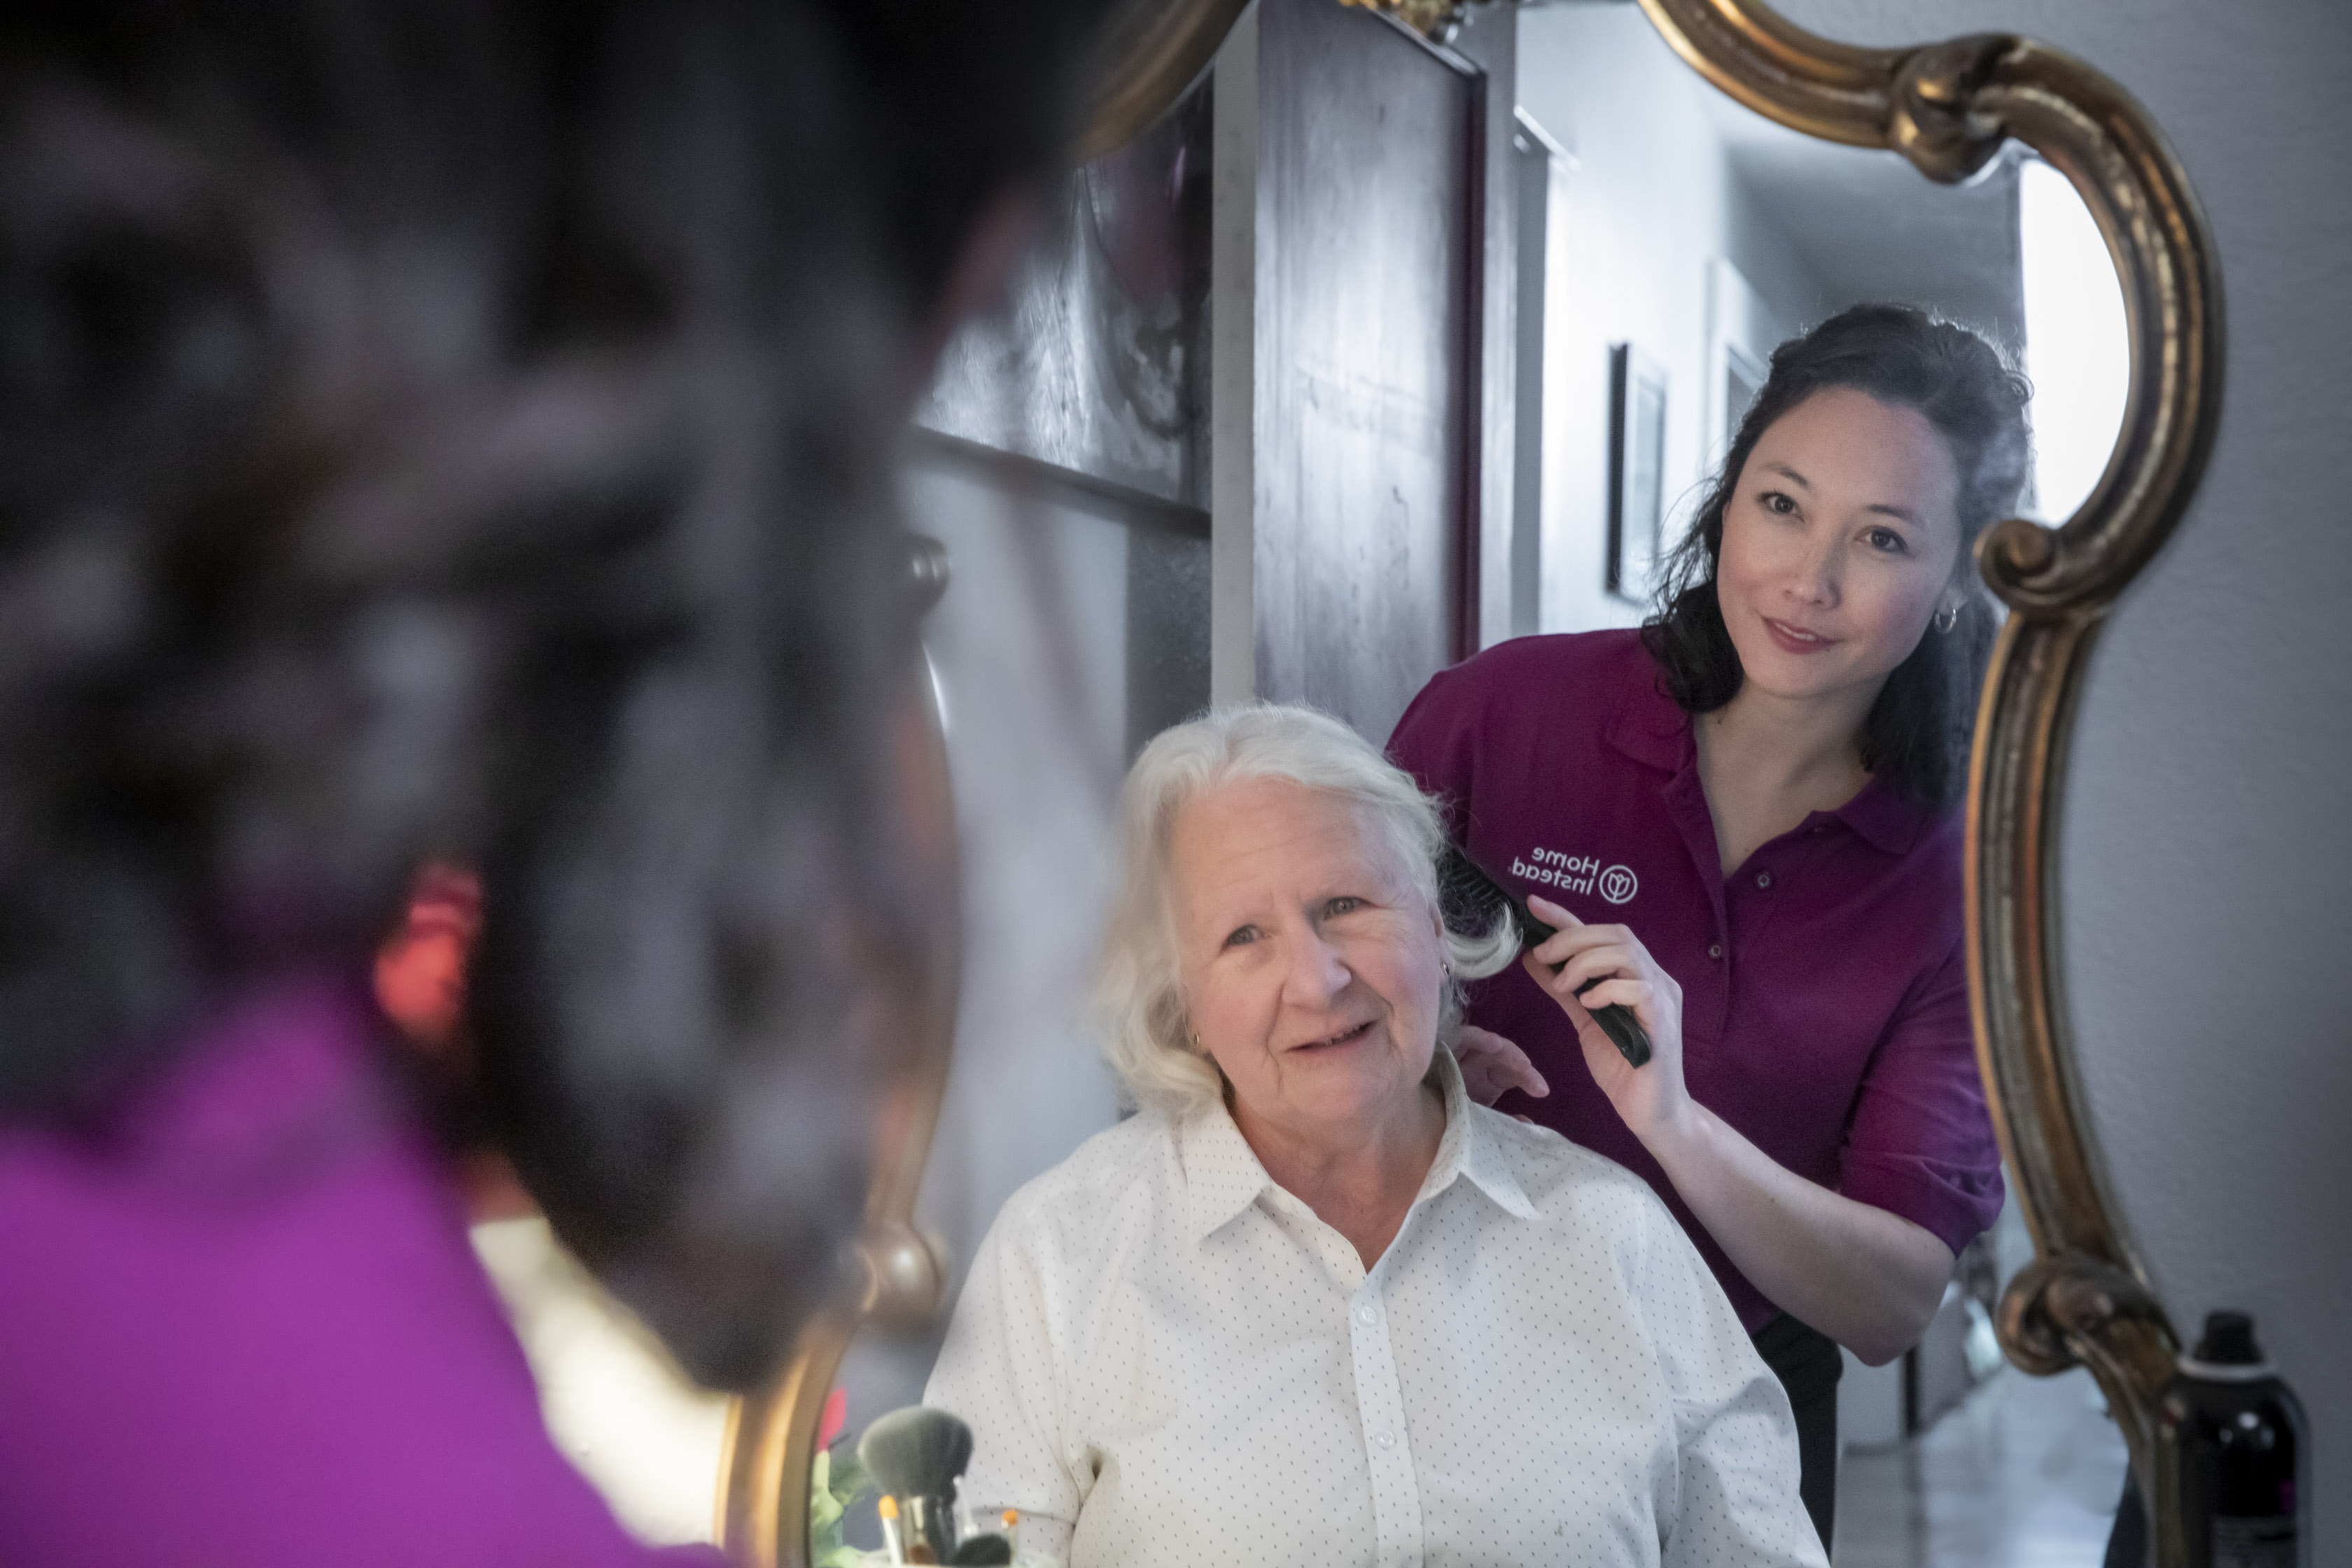 Home Instead Caregiver helping client with grooming